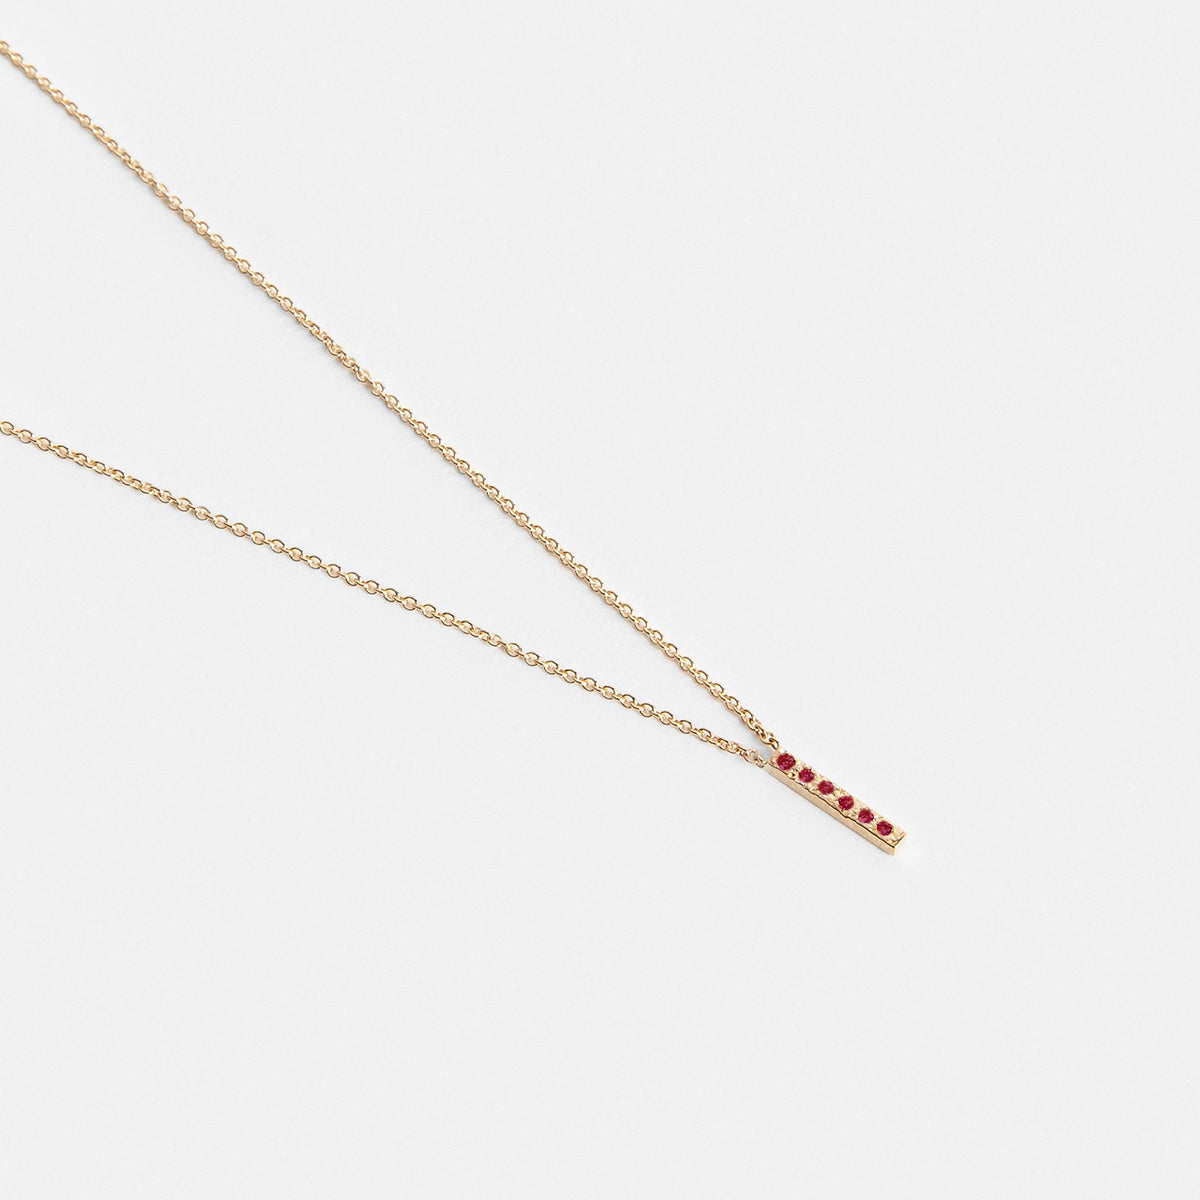 Mini Tiru Delicate Necklace in 14k Gold set with Rubies By SHW Fine Jewelry NYC